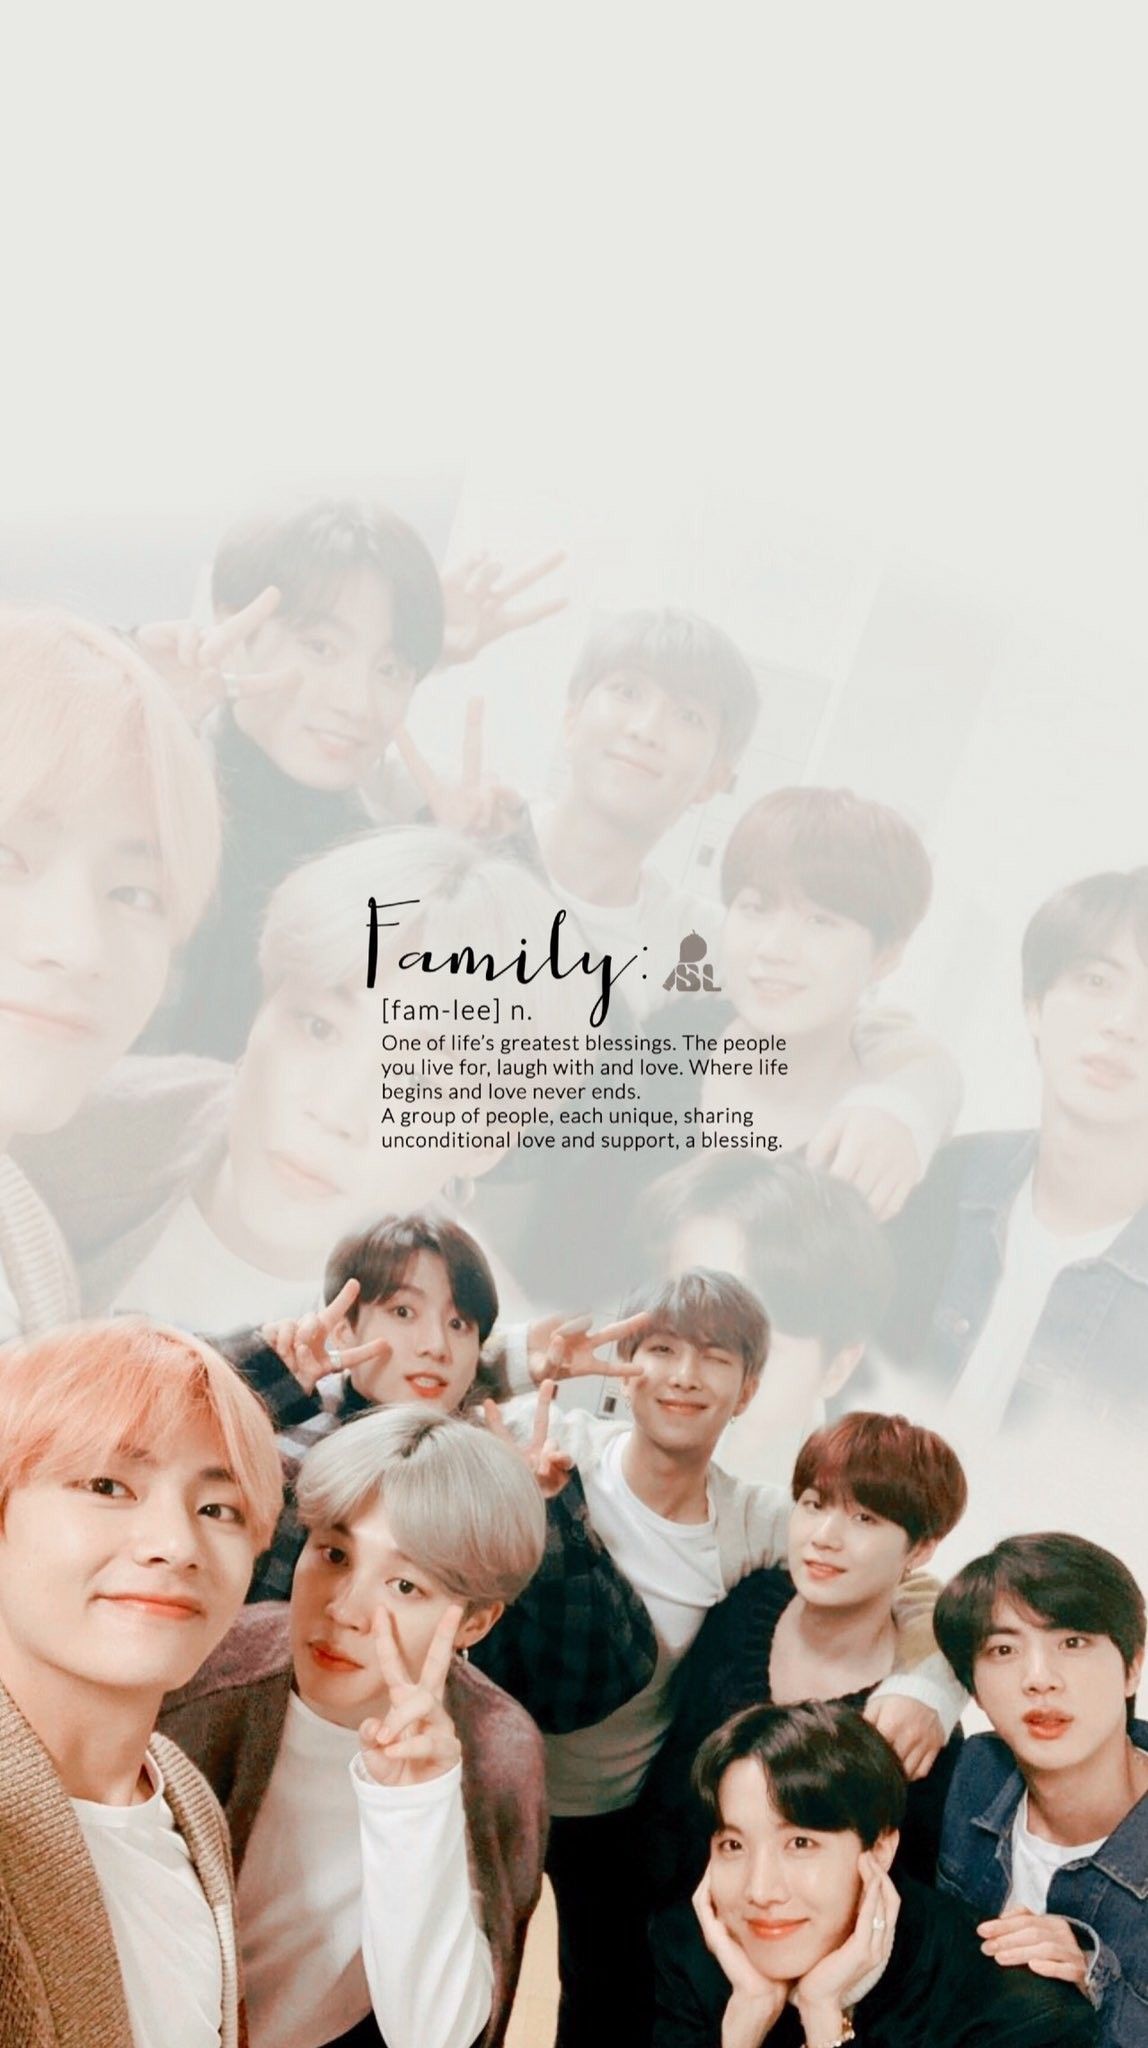 BTS Group Aesthetic Wallpaper Free BTS Group Aesthetic Background